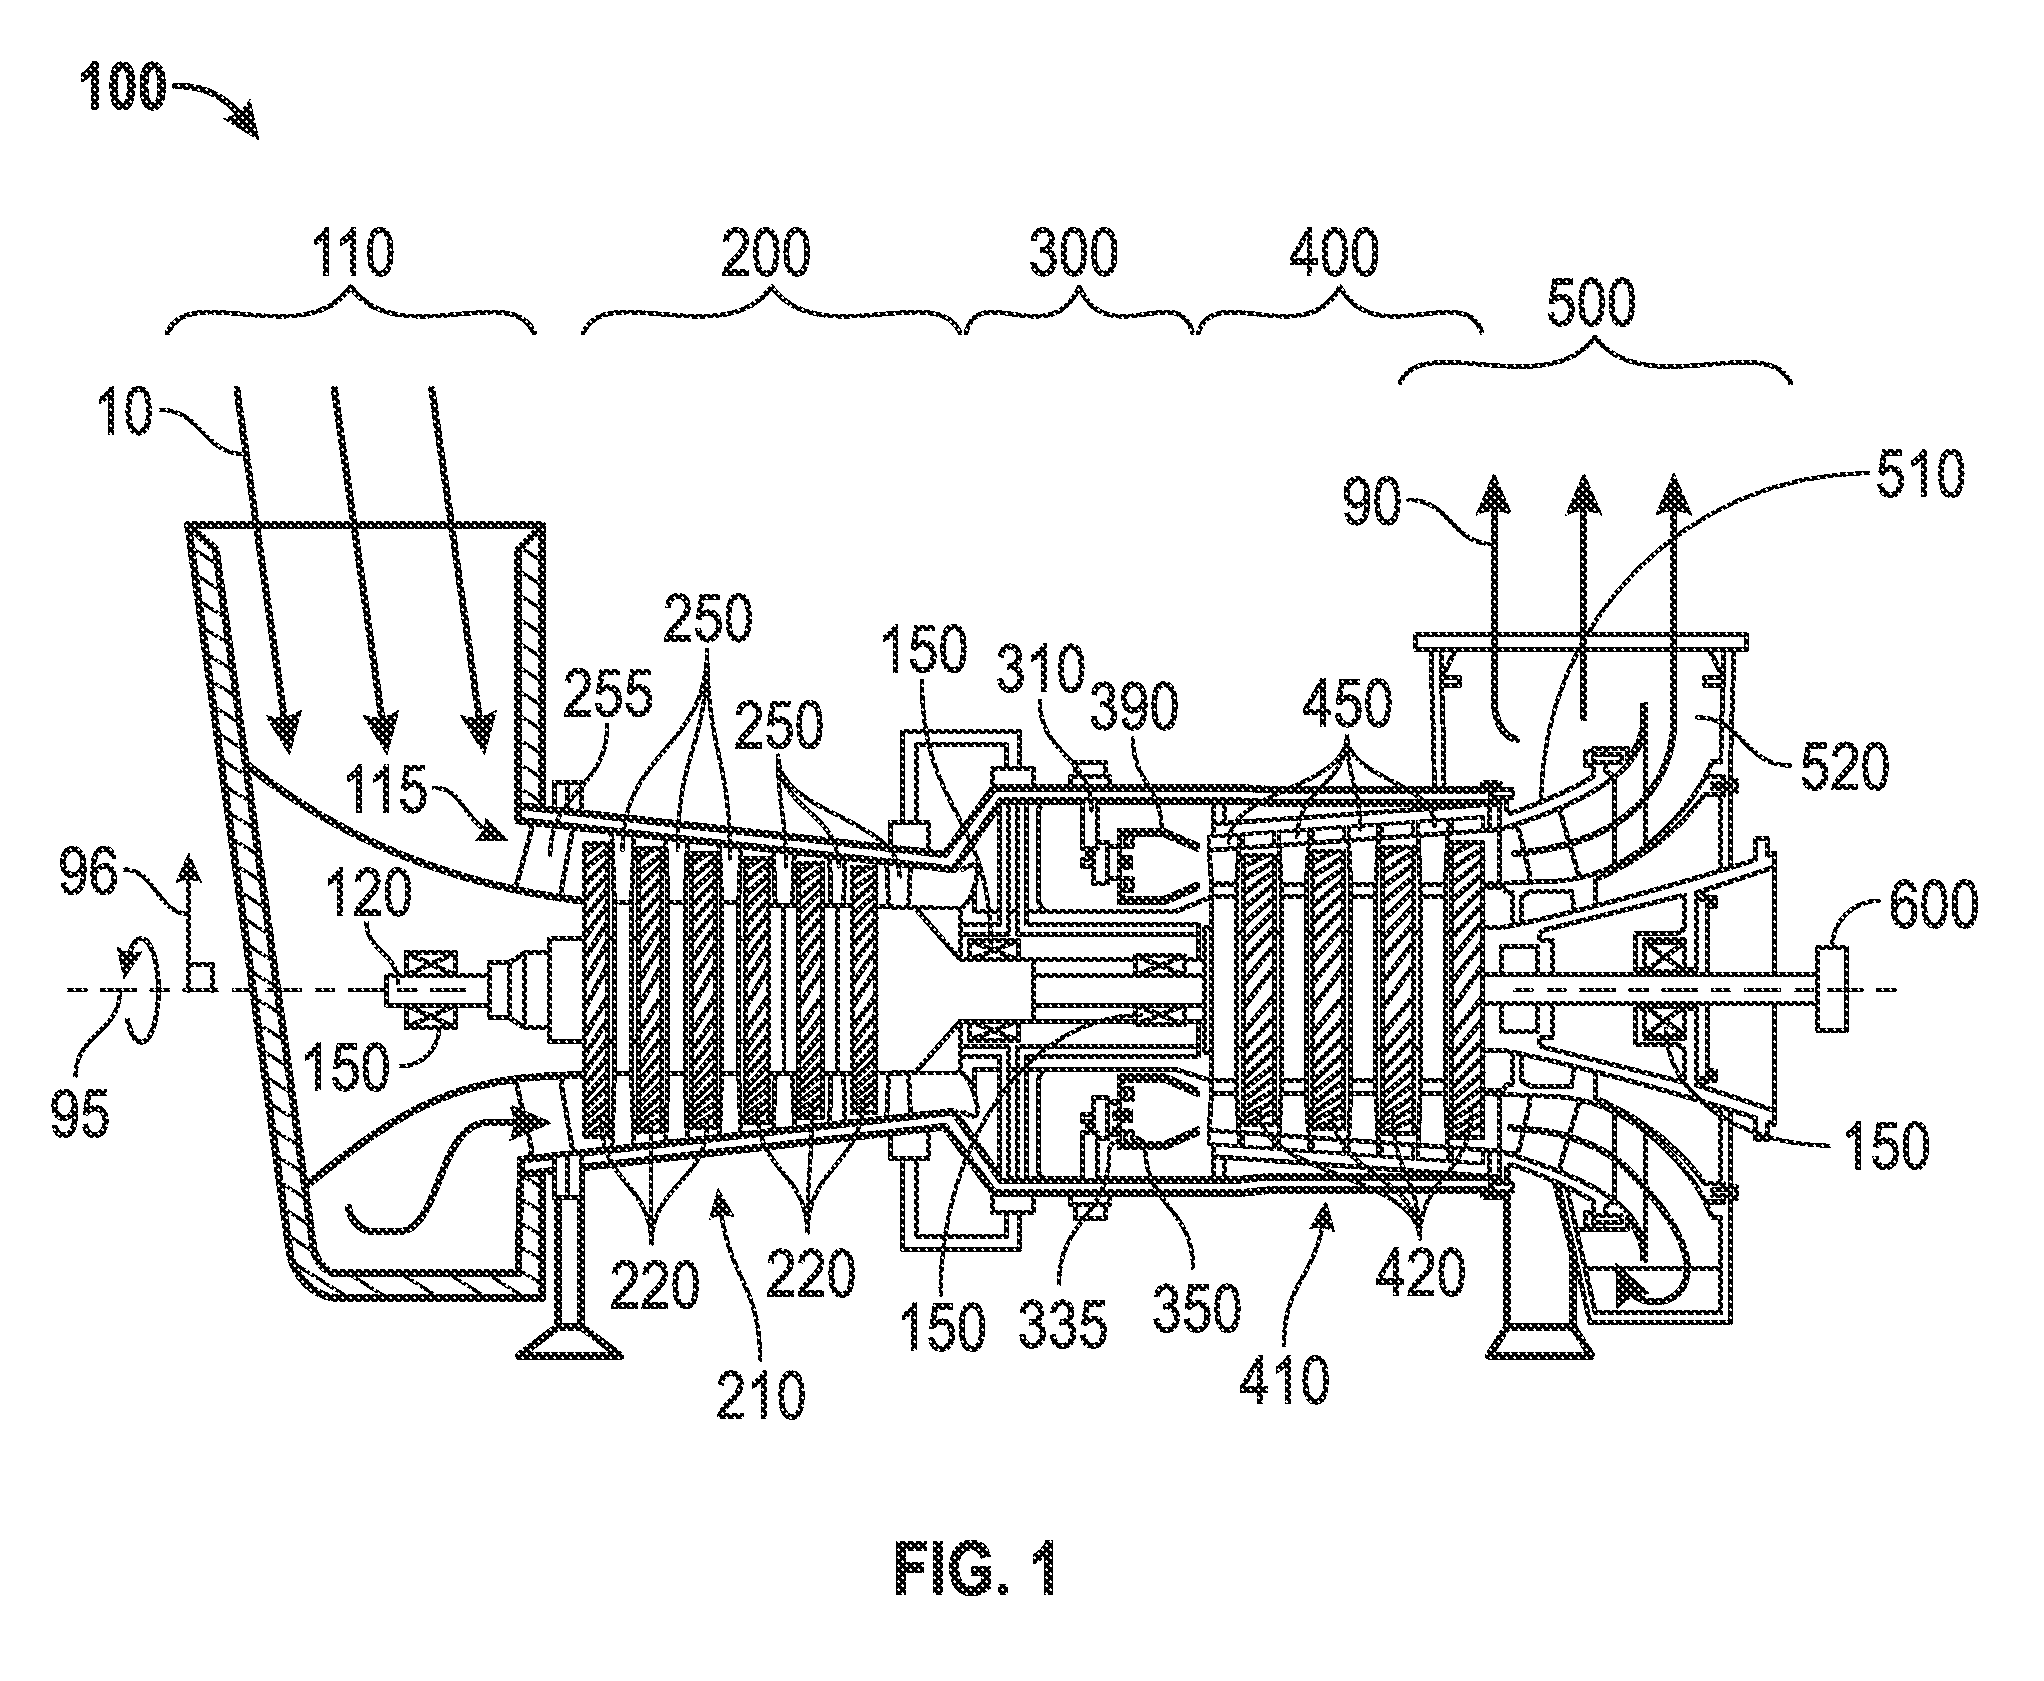 Condition based lifing of gas turbine engine components